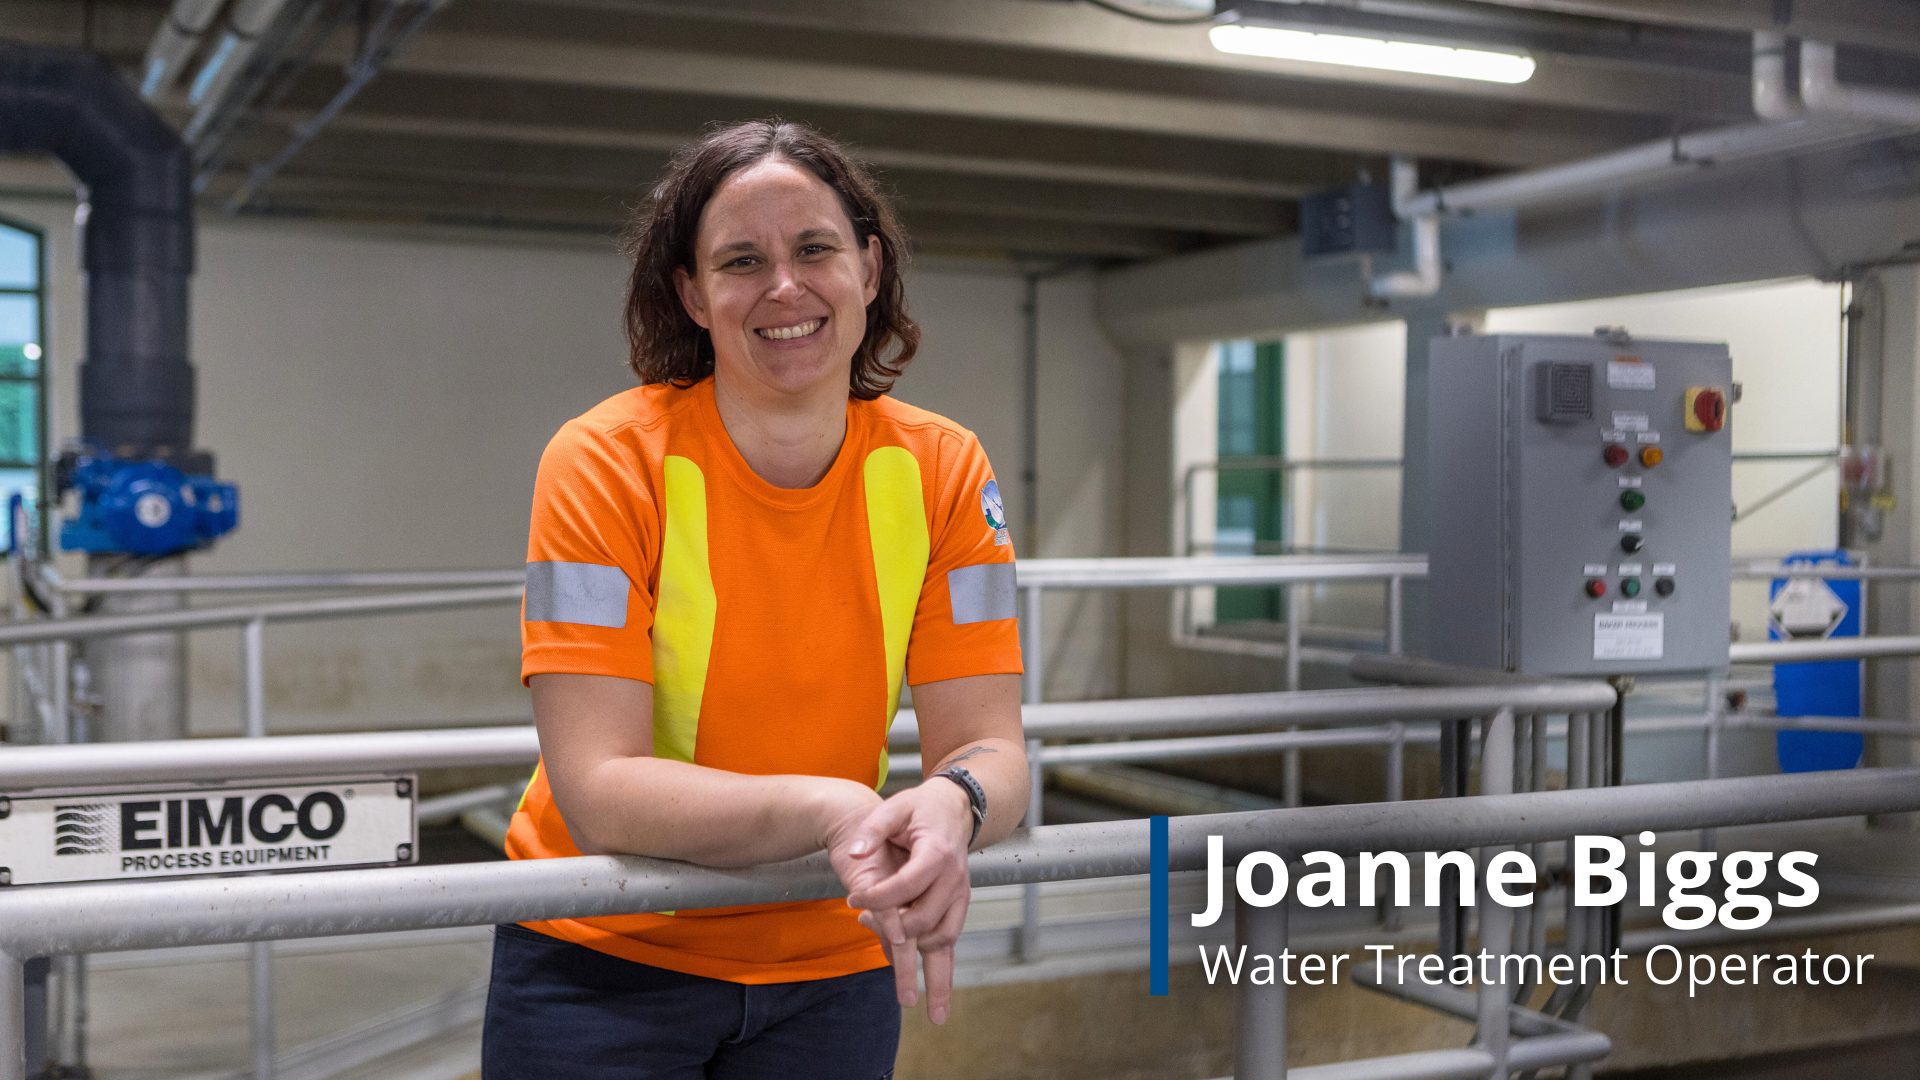 A photo of Joanne Biggs, a Water Treatment Operator leaning against a railing at the water treatment plant.